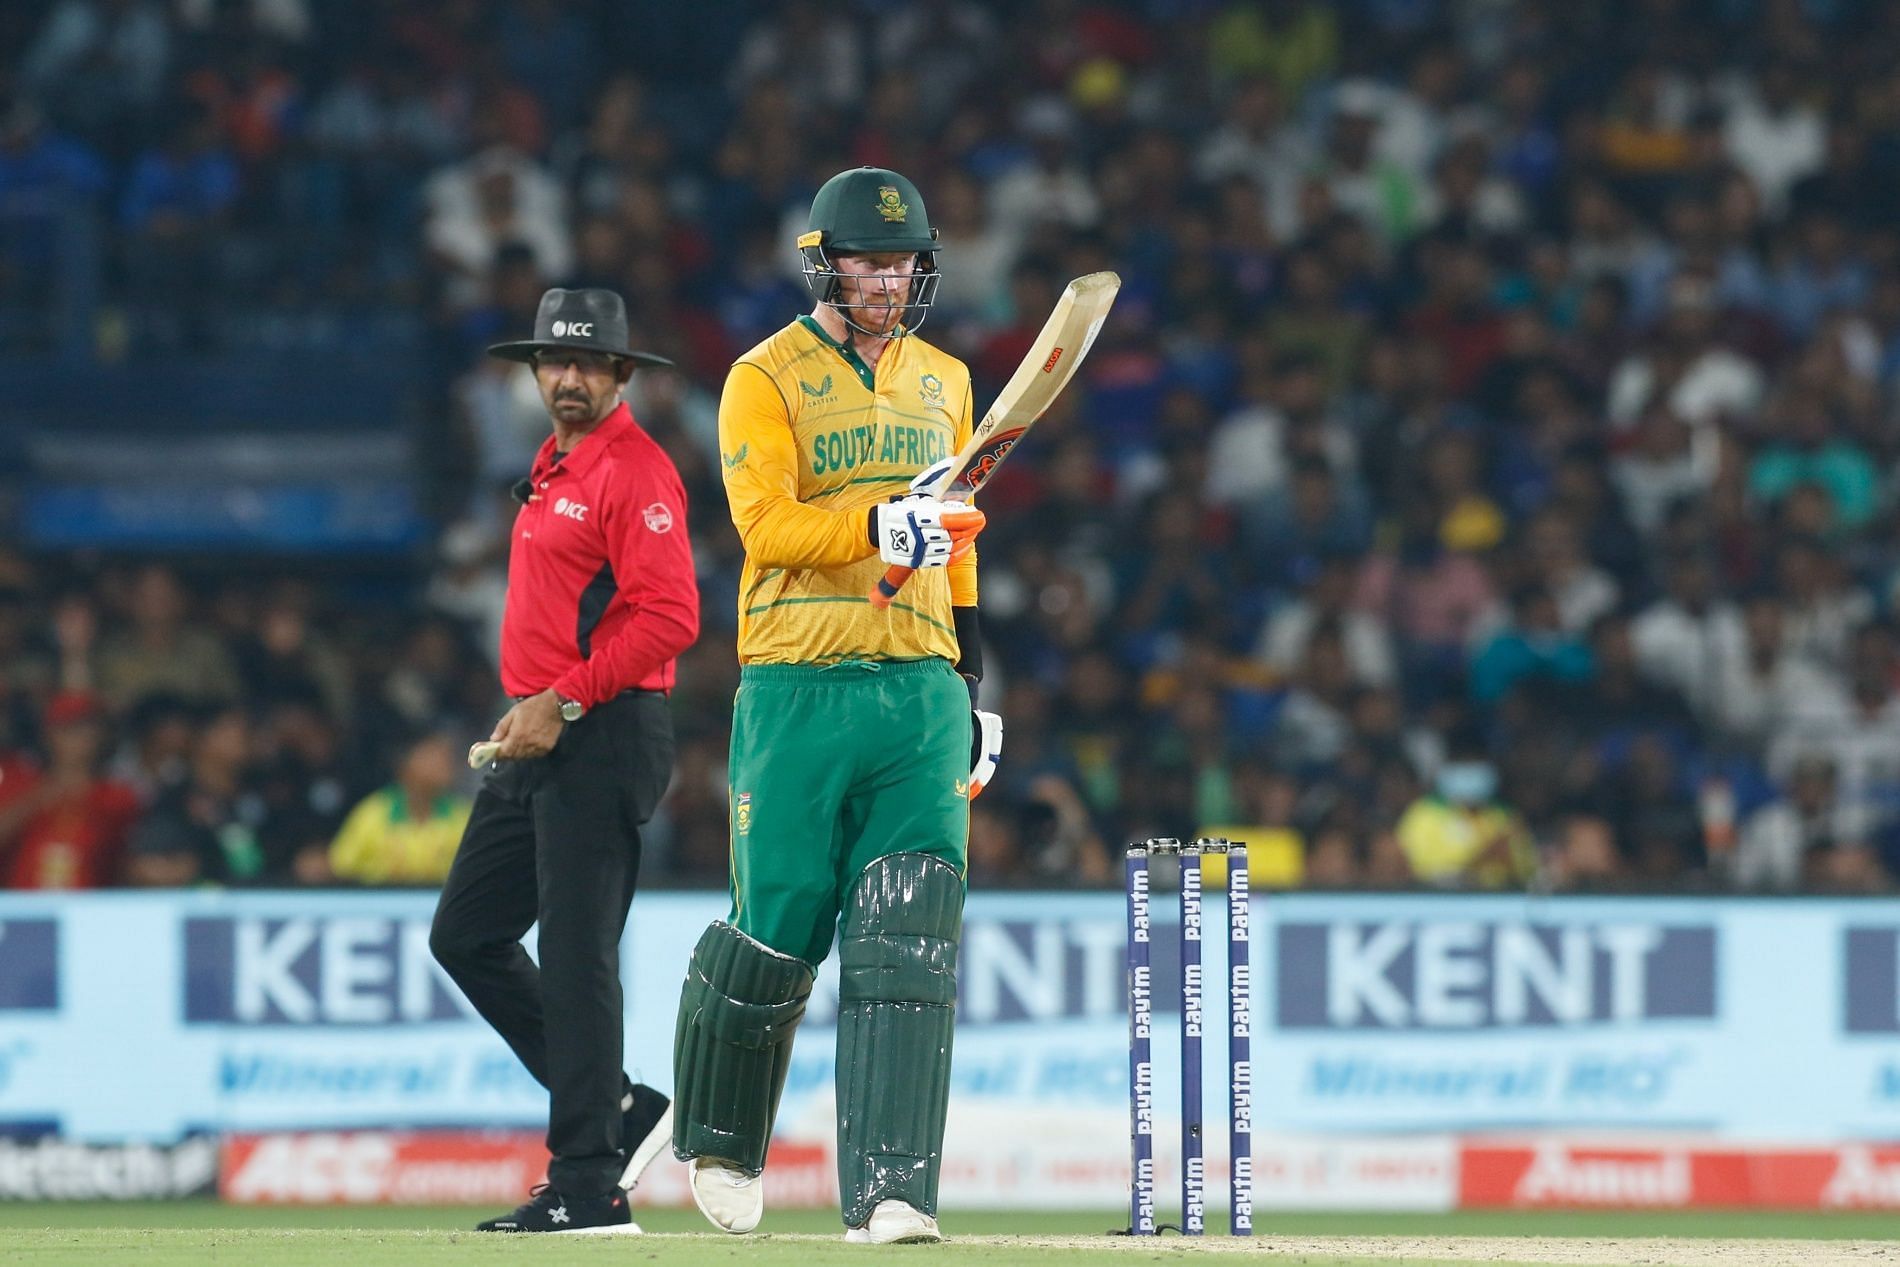 Heinrich Klaasen top-scored with 81 as Proteas chased down 149. Pic: ICC